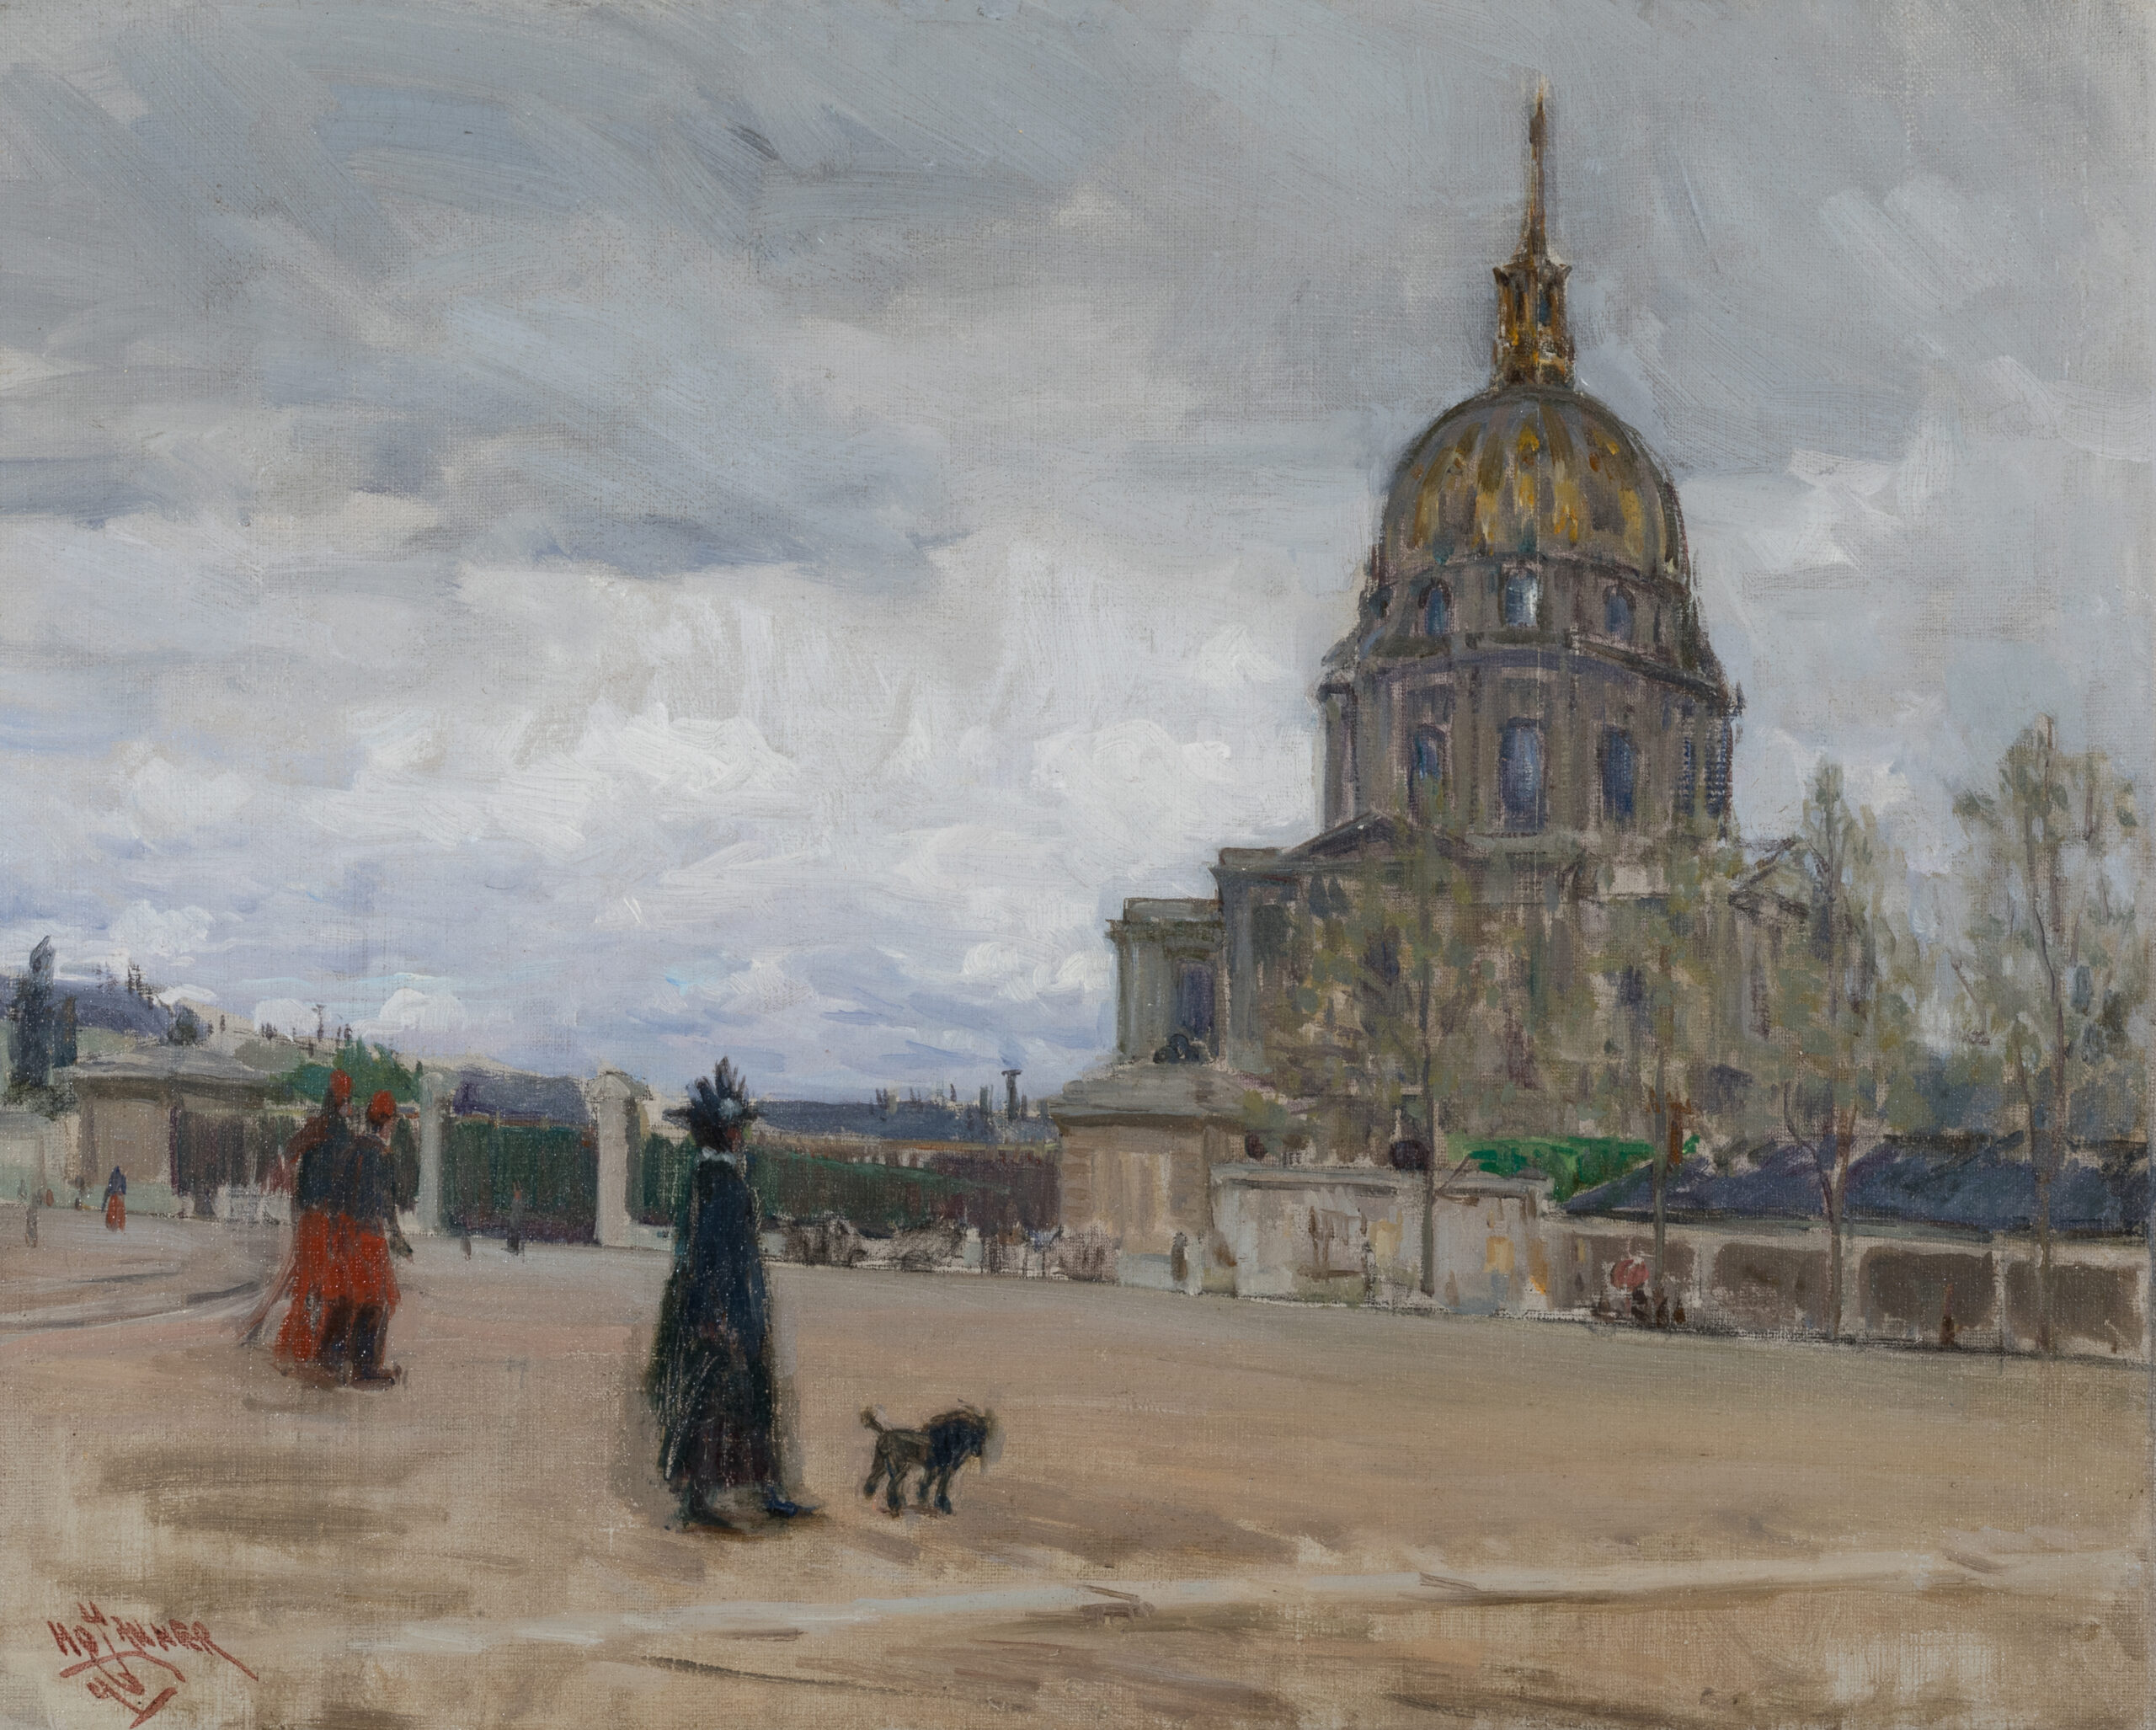 Impressionist painting of a street scene in Paris. Two individuals and a dog are in the foreground, and a domed building is in the background. The sky is gray and cloudy.